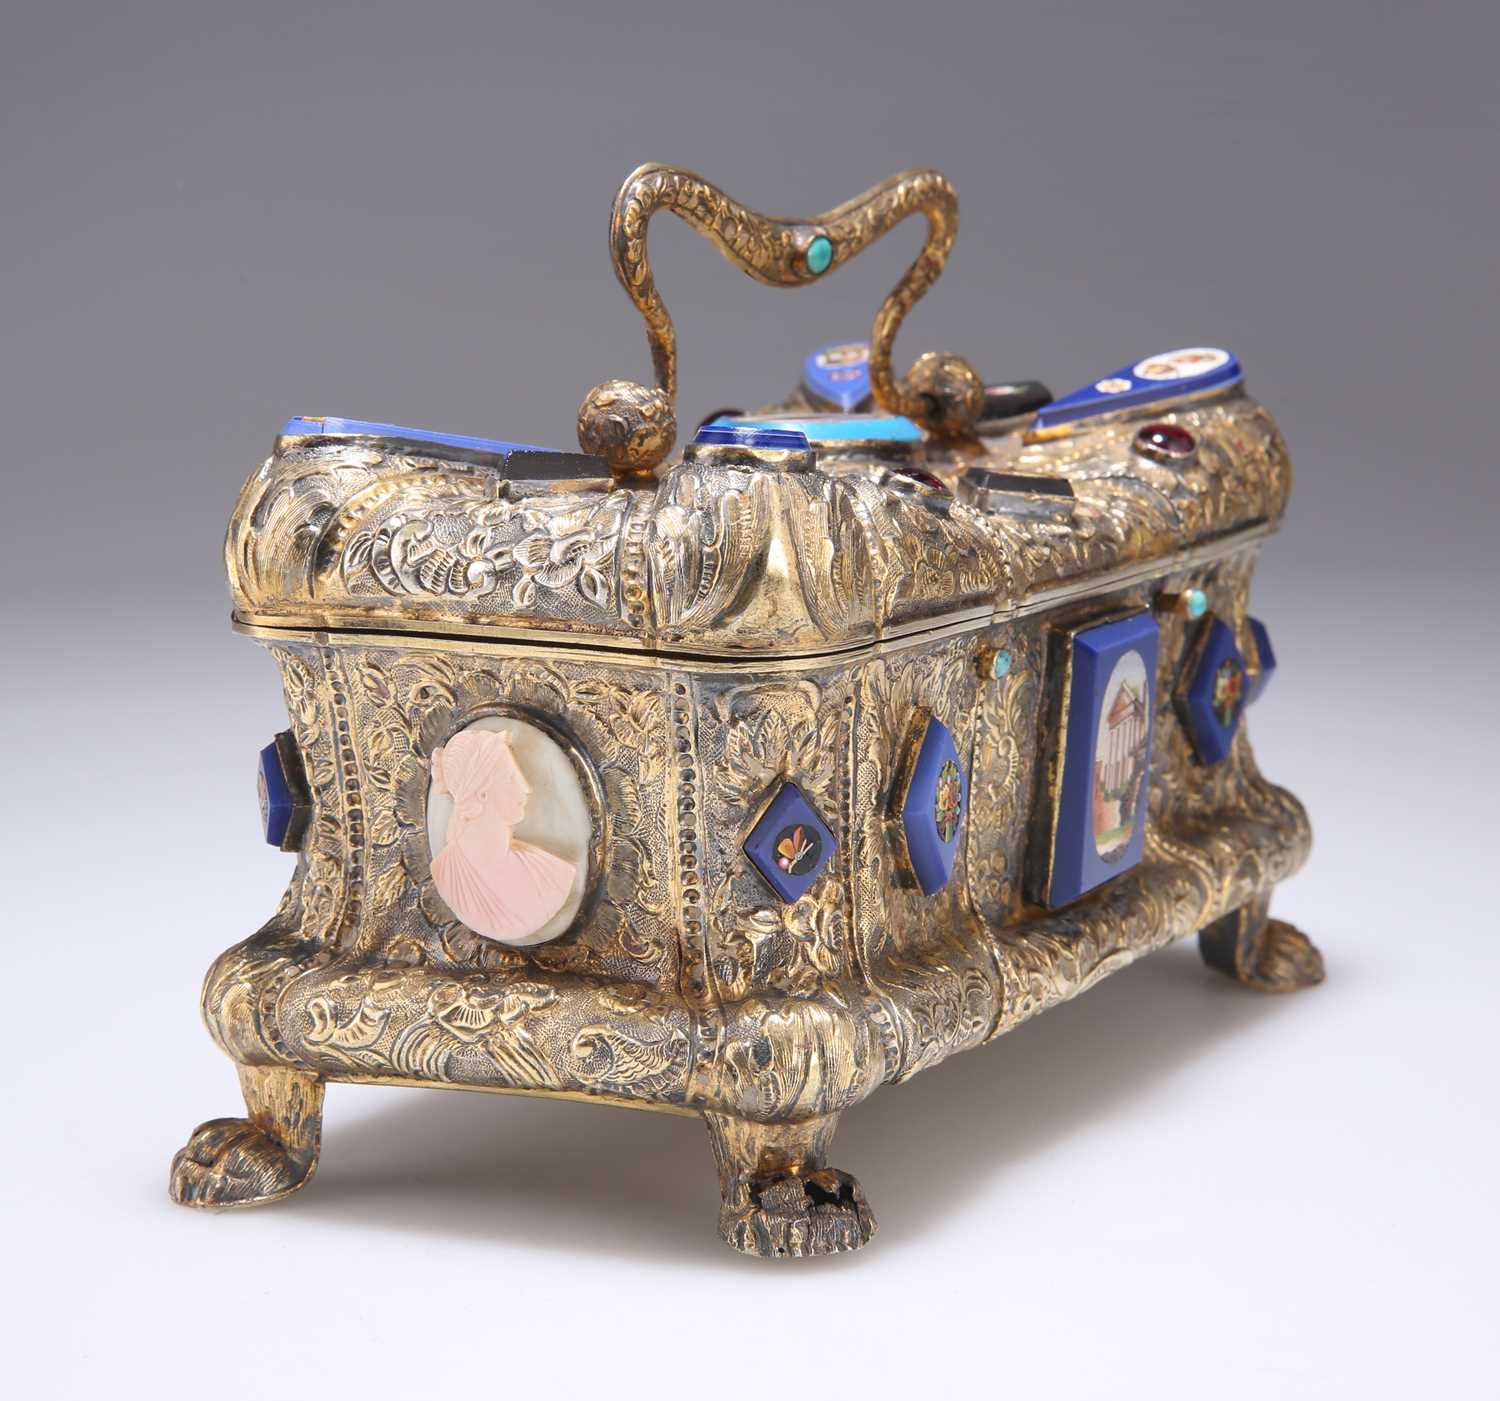 A RARE VIENNESE SILVER-GILT CASKET MOUNTED WITH CAMEOS, MICROMOSAICS AND 'JEWELS' - Image 3 of 5